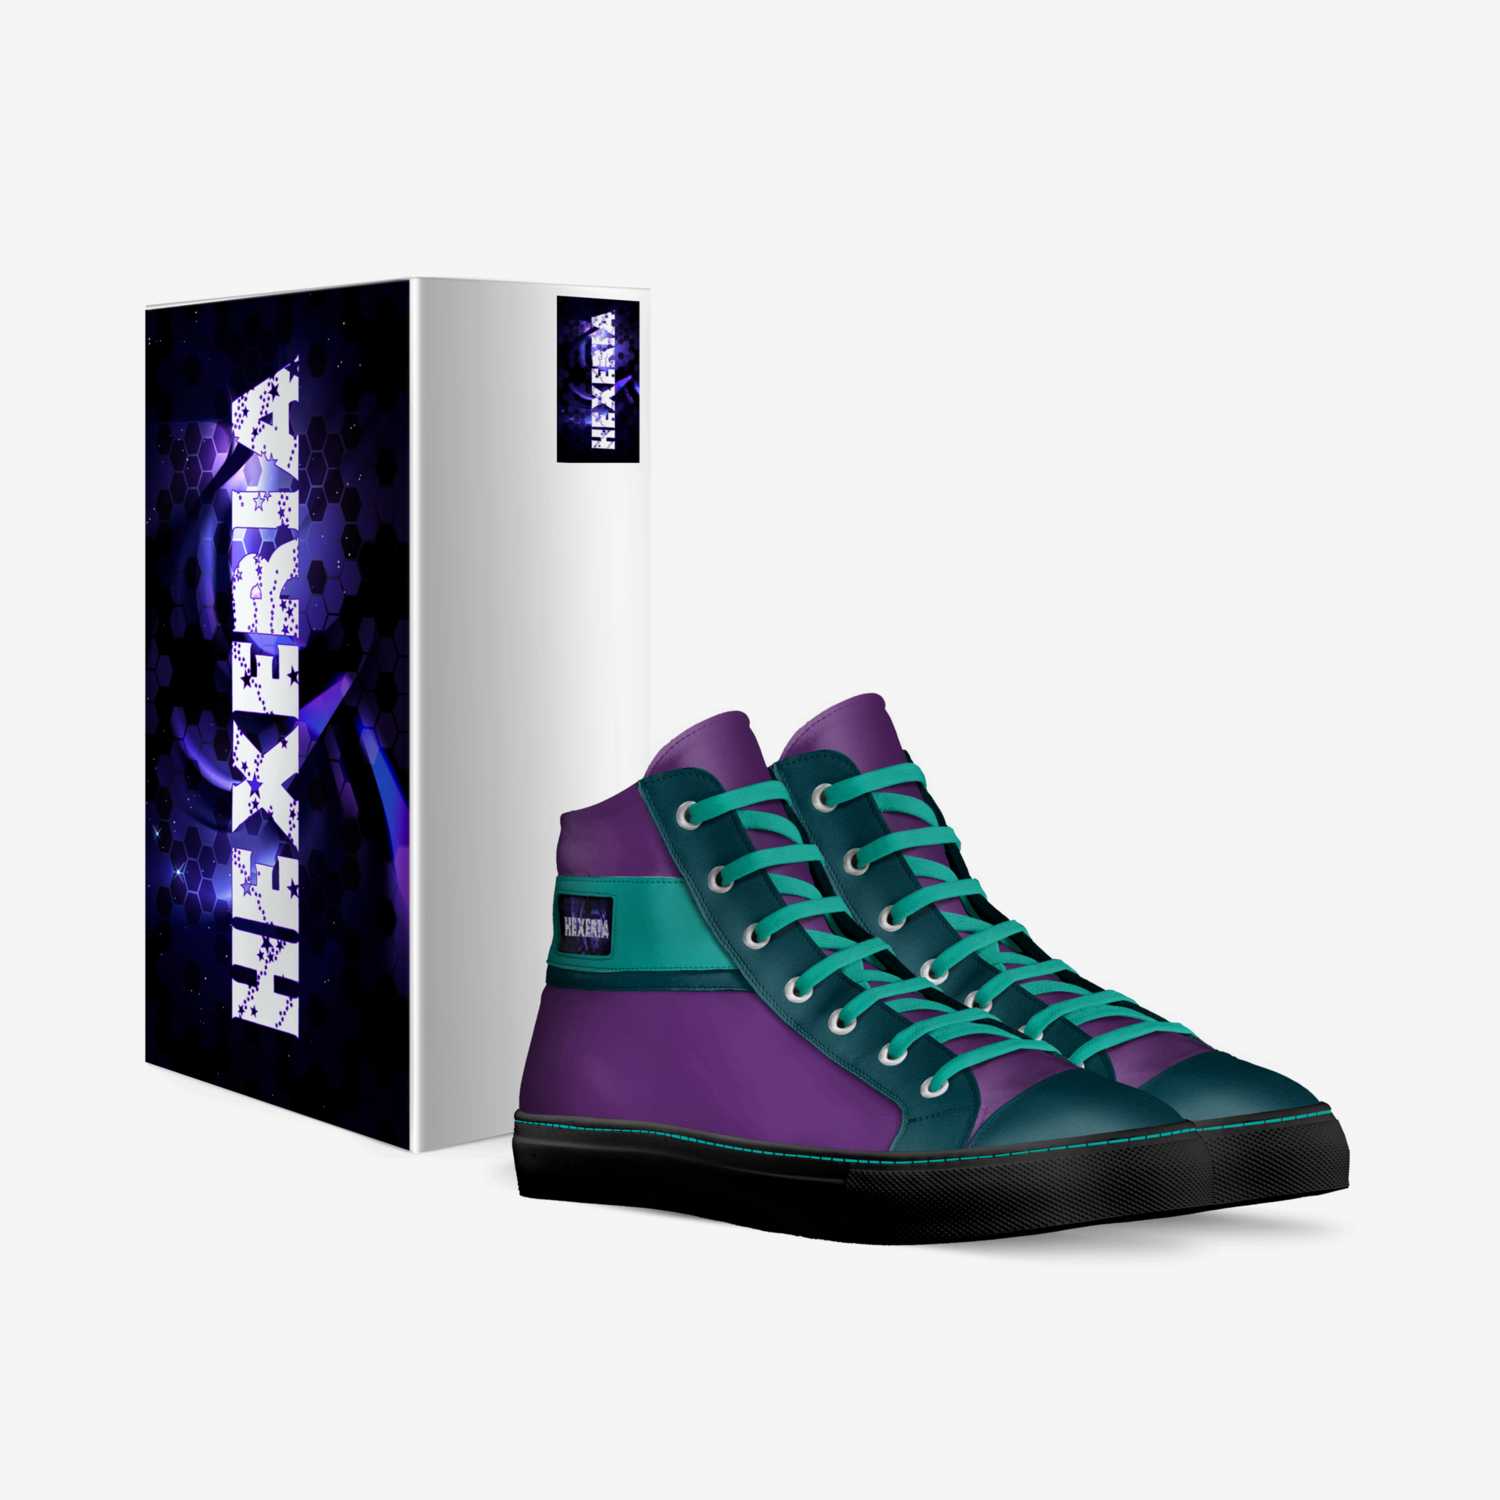 HEXERIA custom made in Italy shoes by Alexander Eri | Box view